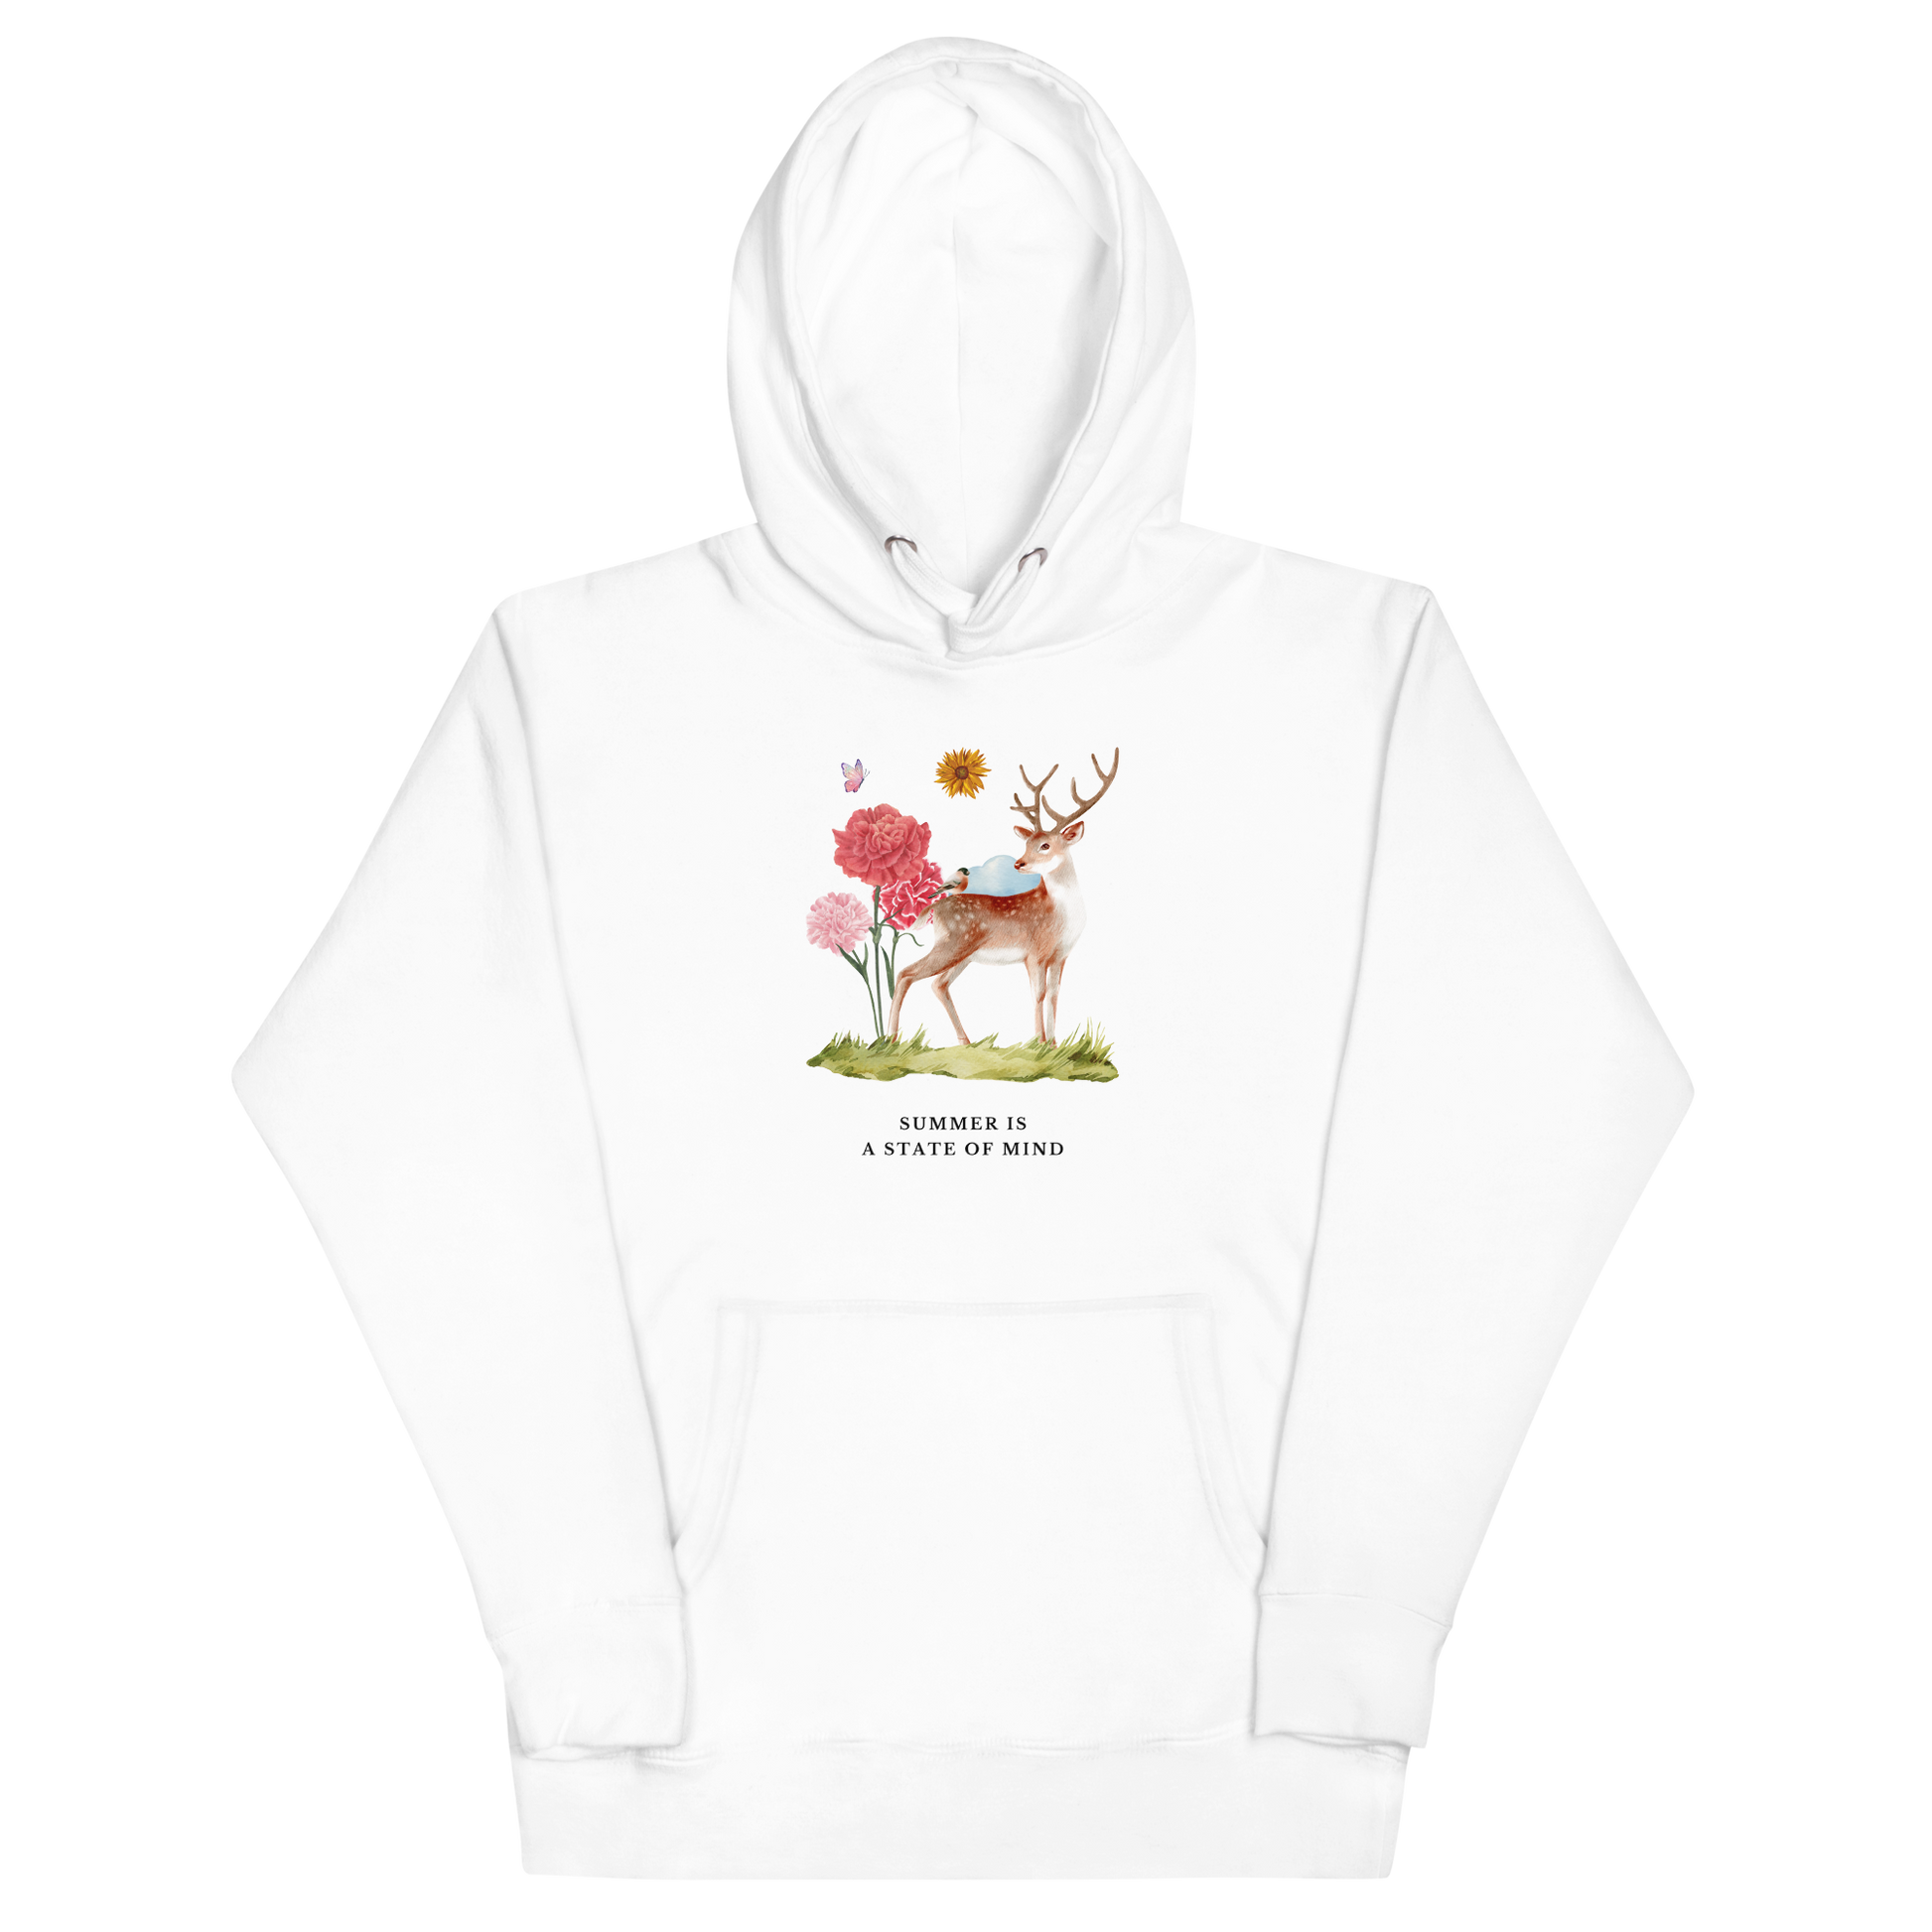 White Premium Summer Is a State of Mind Hoodie showcasing a Summer Is a State of Mind graphic on the chest - Cute Graphic Summer Hoodies - Boozy Fox